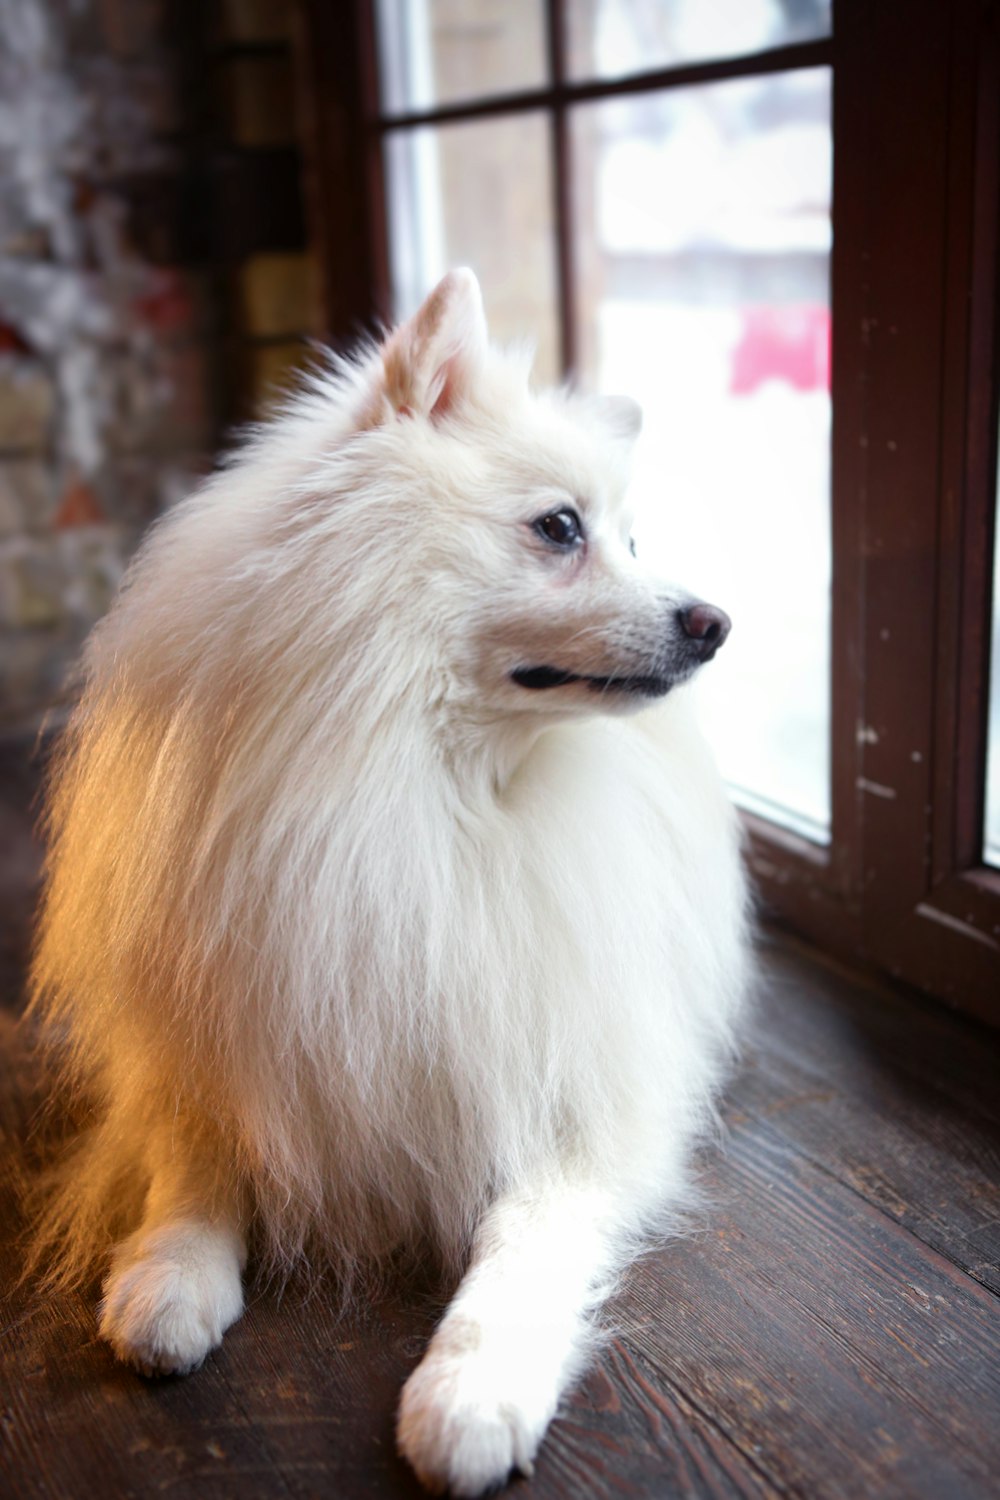 a white dog sitting on top of a wooden floor next to a window